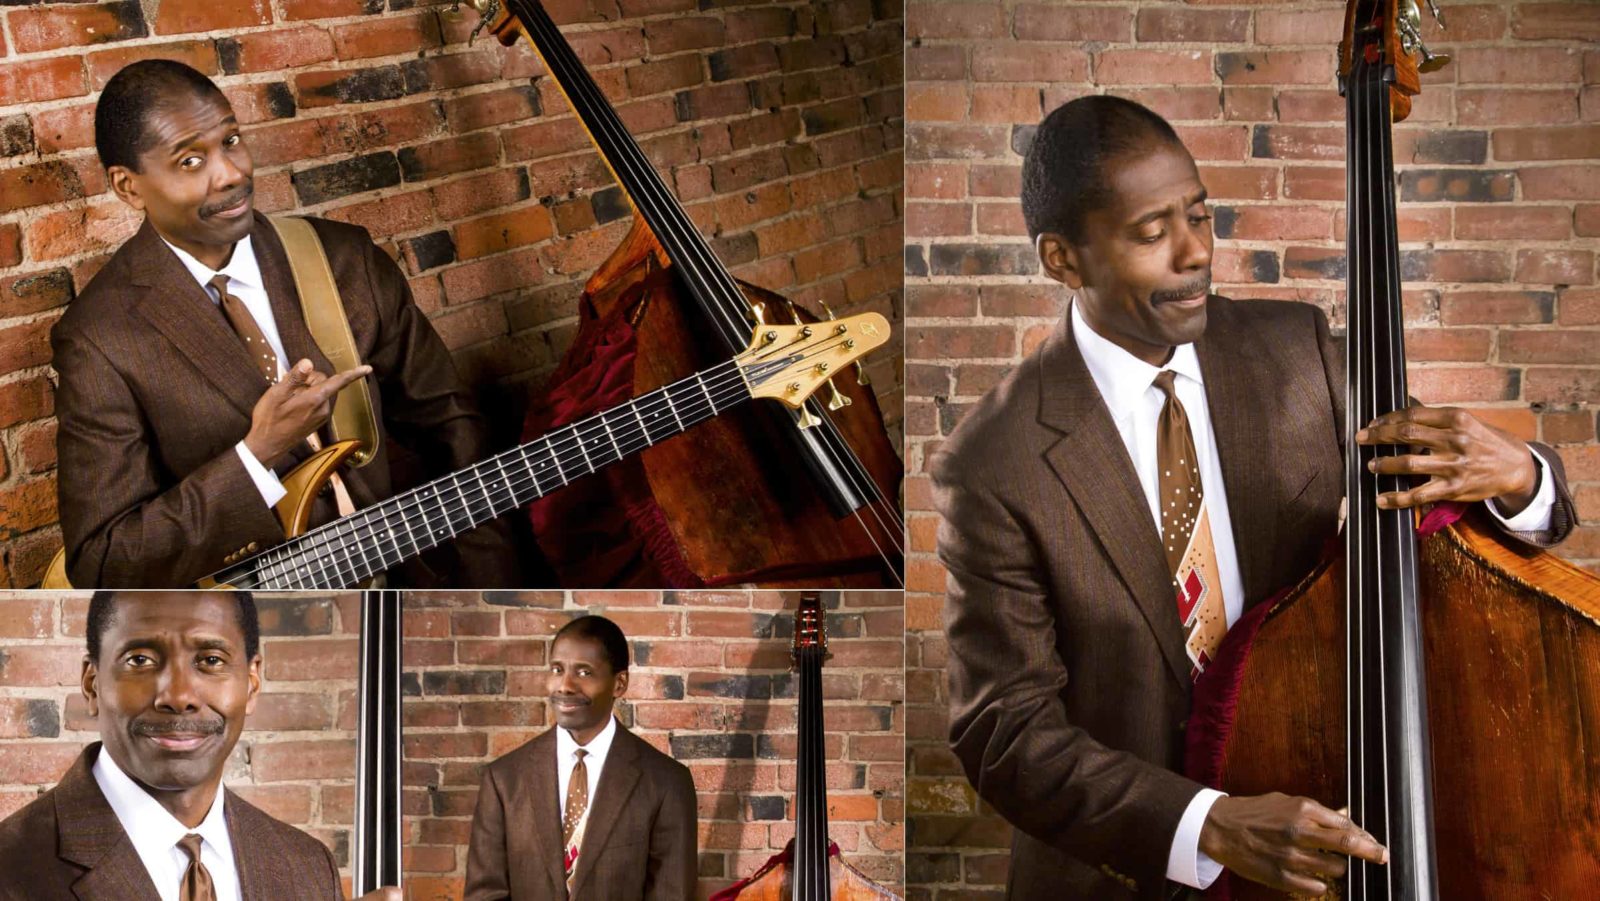 Nationally recognized standing bass musician and composer Avery Sharpe has released a new album honoring 400 years of Black American history.